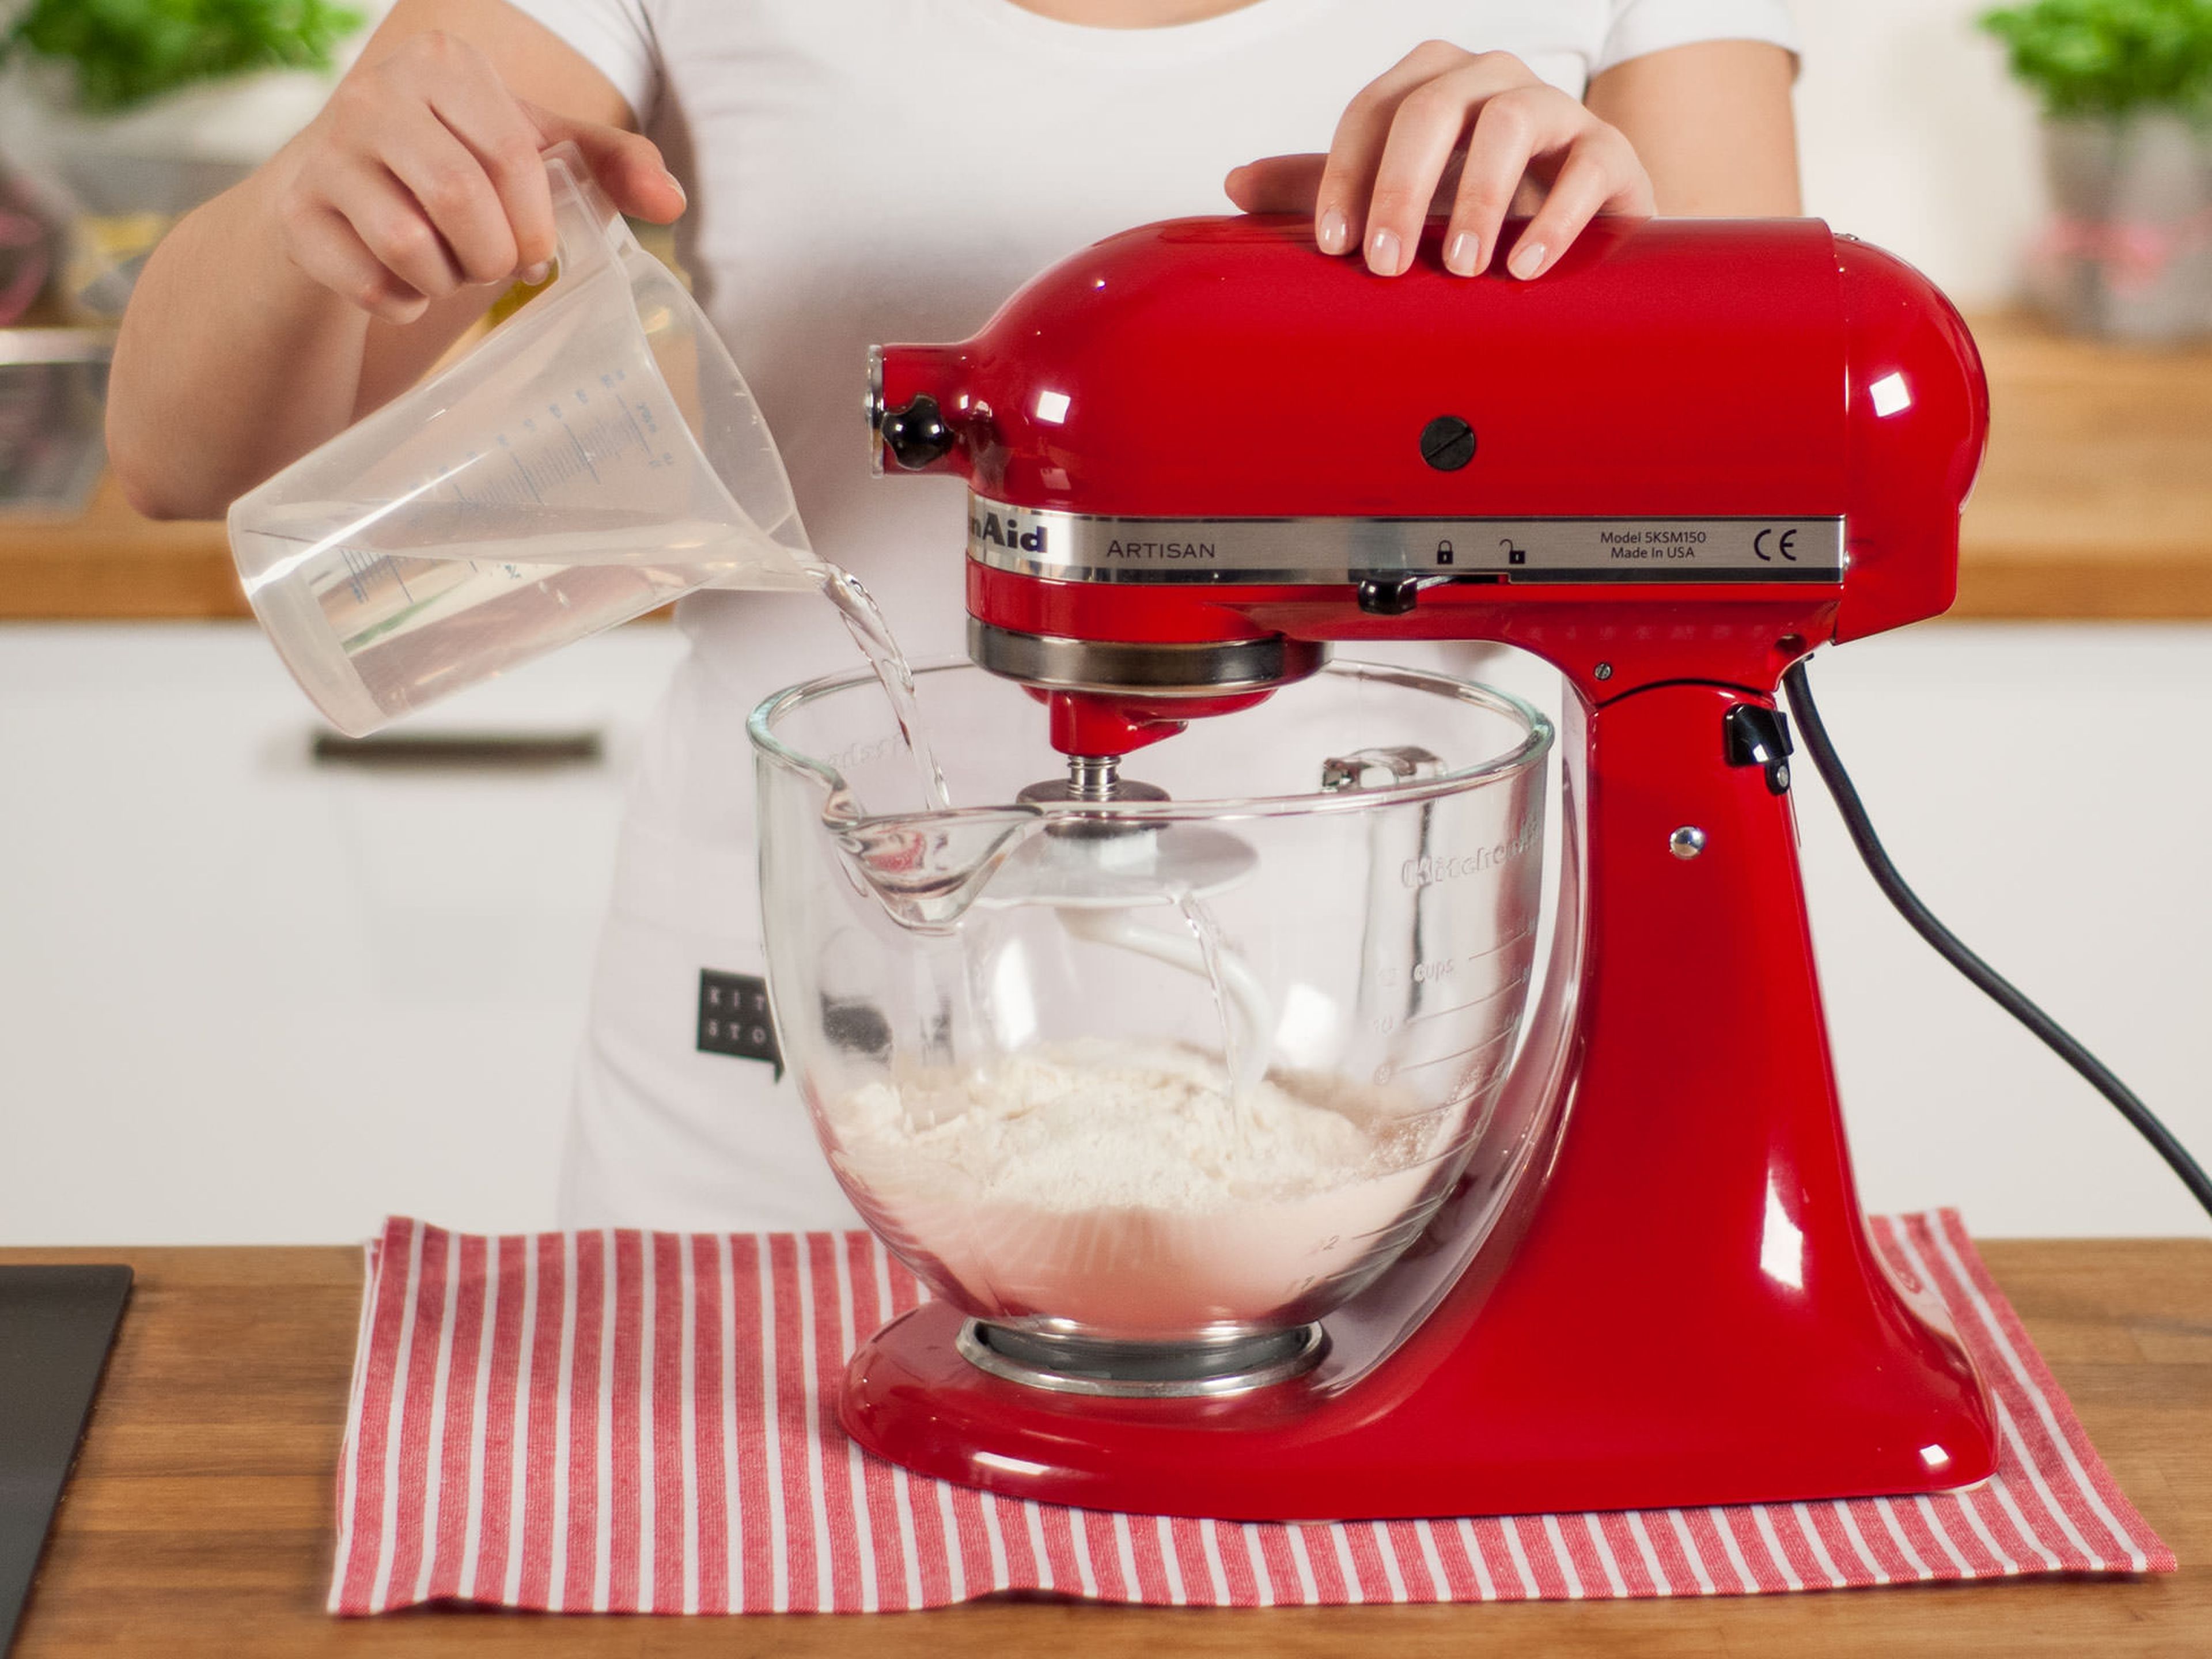 In a standing mixer or with a hand mixer, beat together flour, a pinch of salt, and parts of the water and knead for approx. 5 – 7 min. until a smooth dough forms.